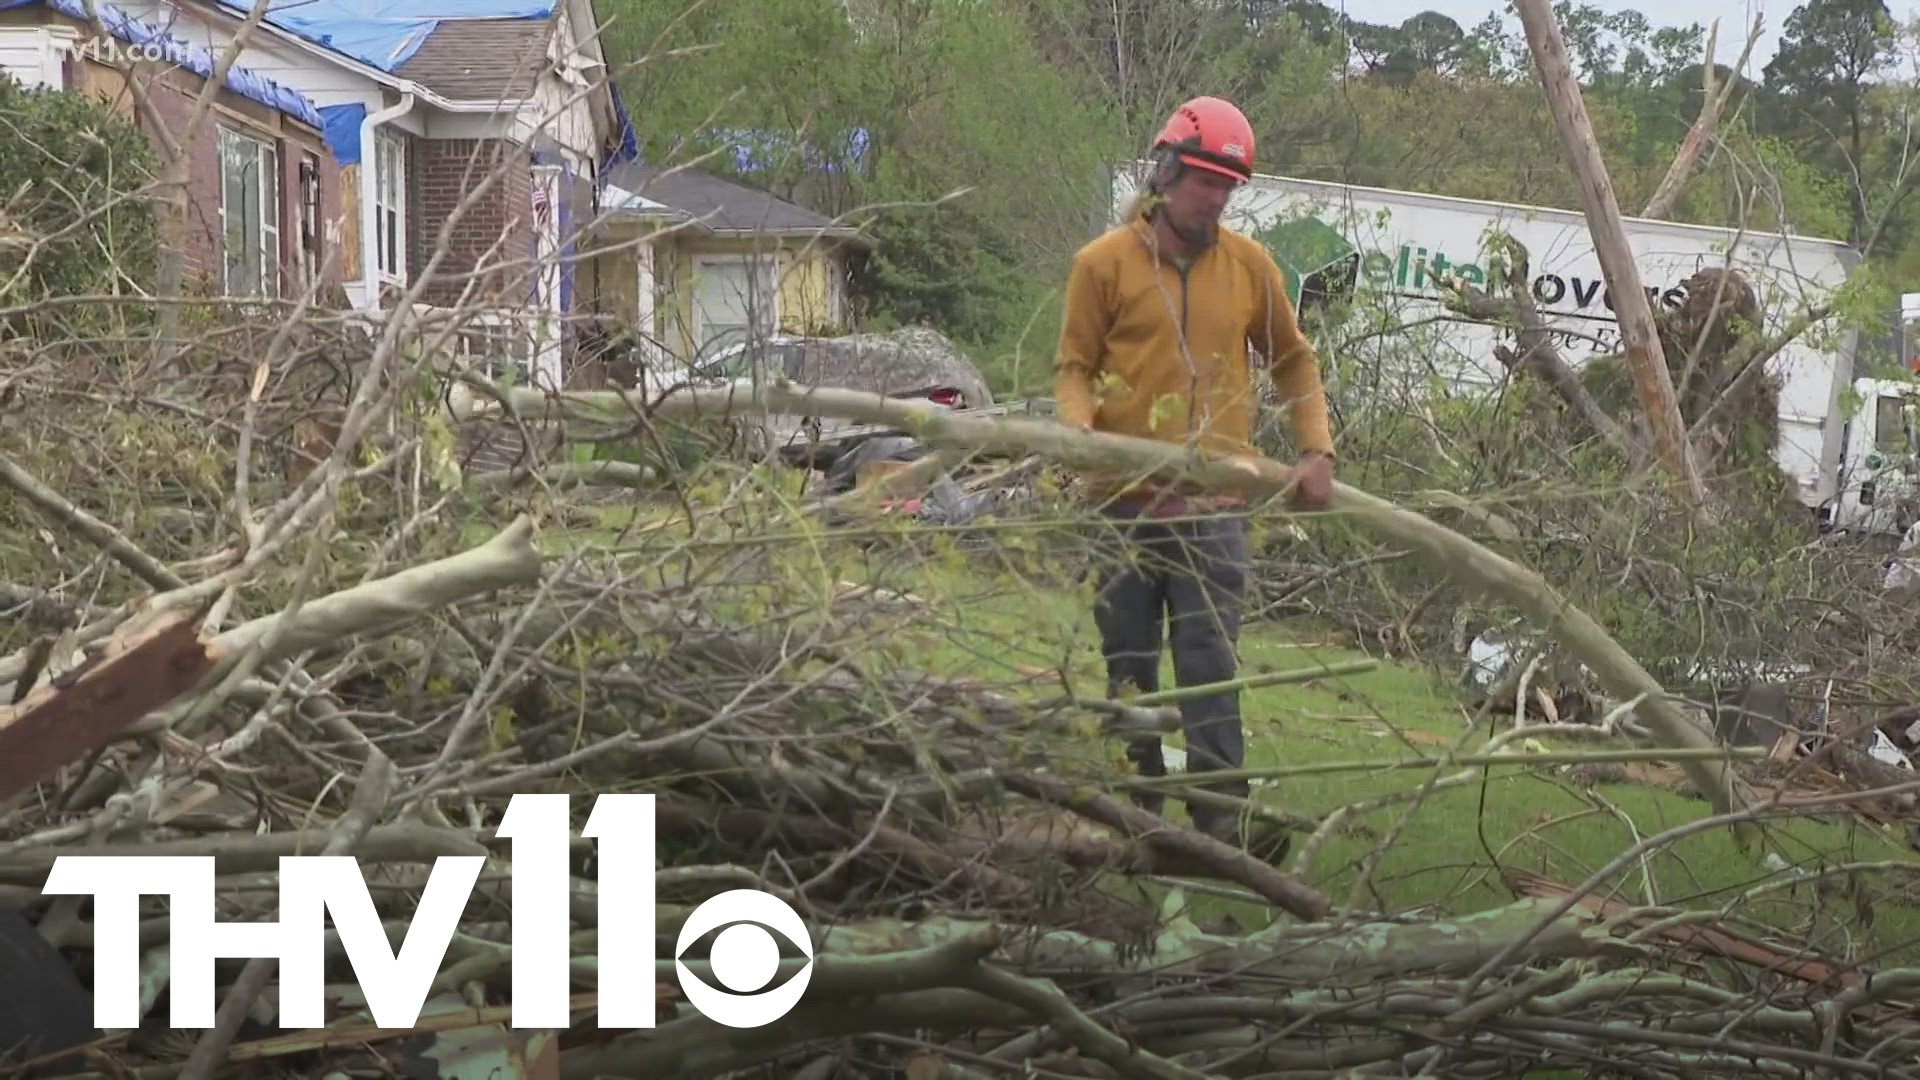 One week after an EF-3 tornado ripped through Arkansas, hundreds of displaced people are trying to figure out their next move to find more permanent housing.